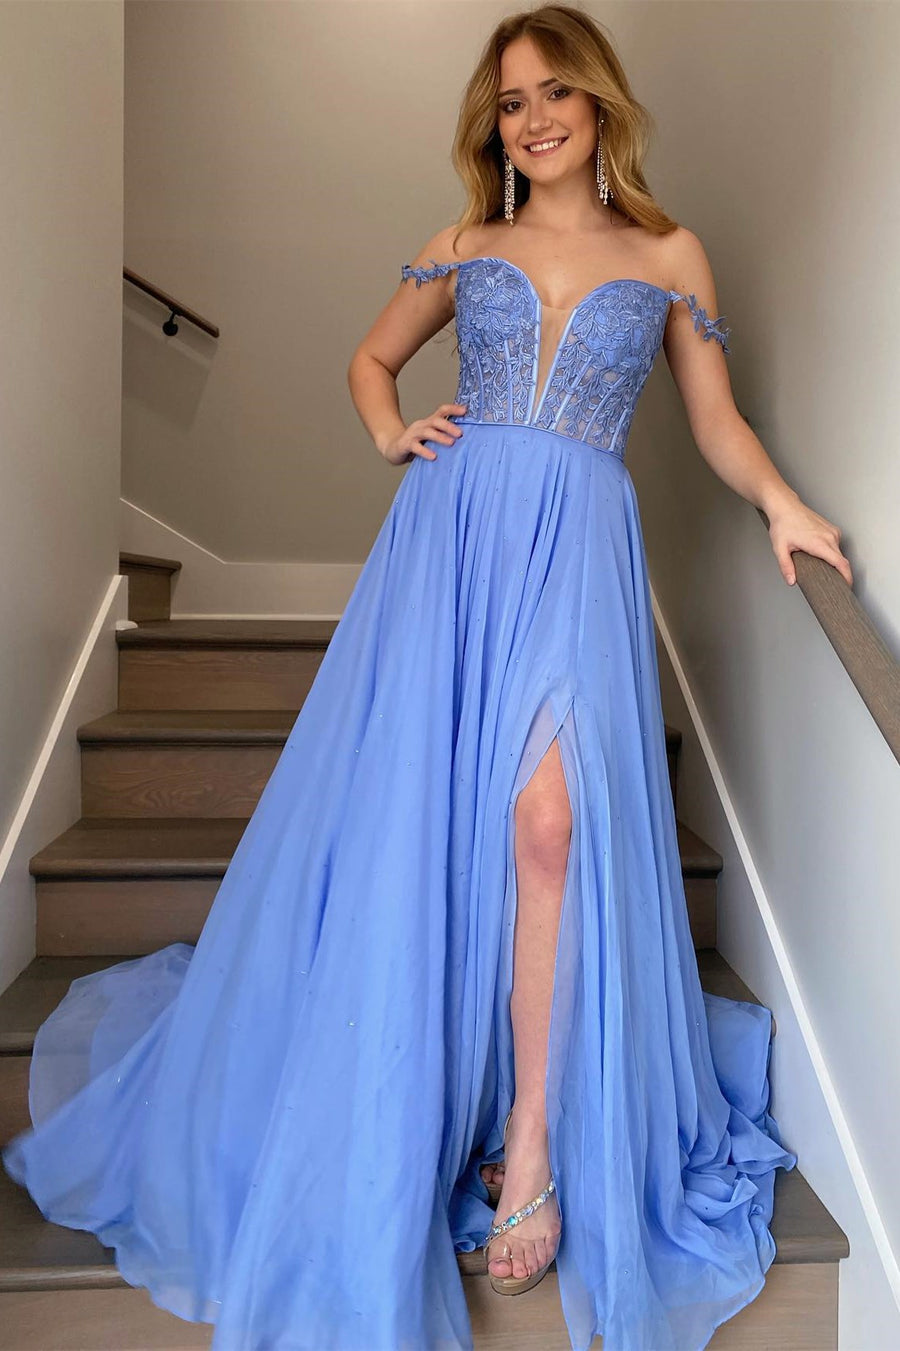 Periwinkle Off-the-Shoulder A-line Princess Prom Gown